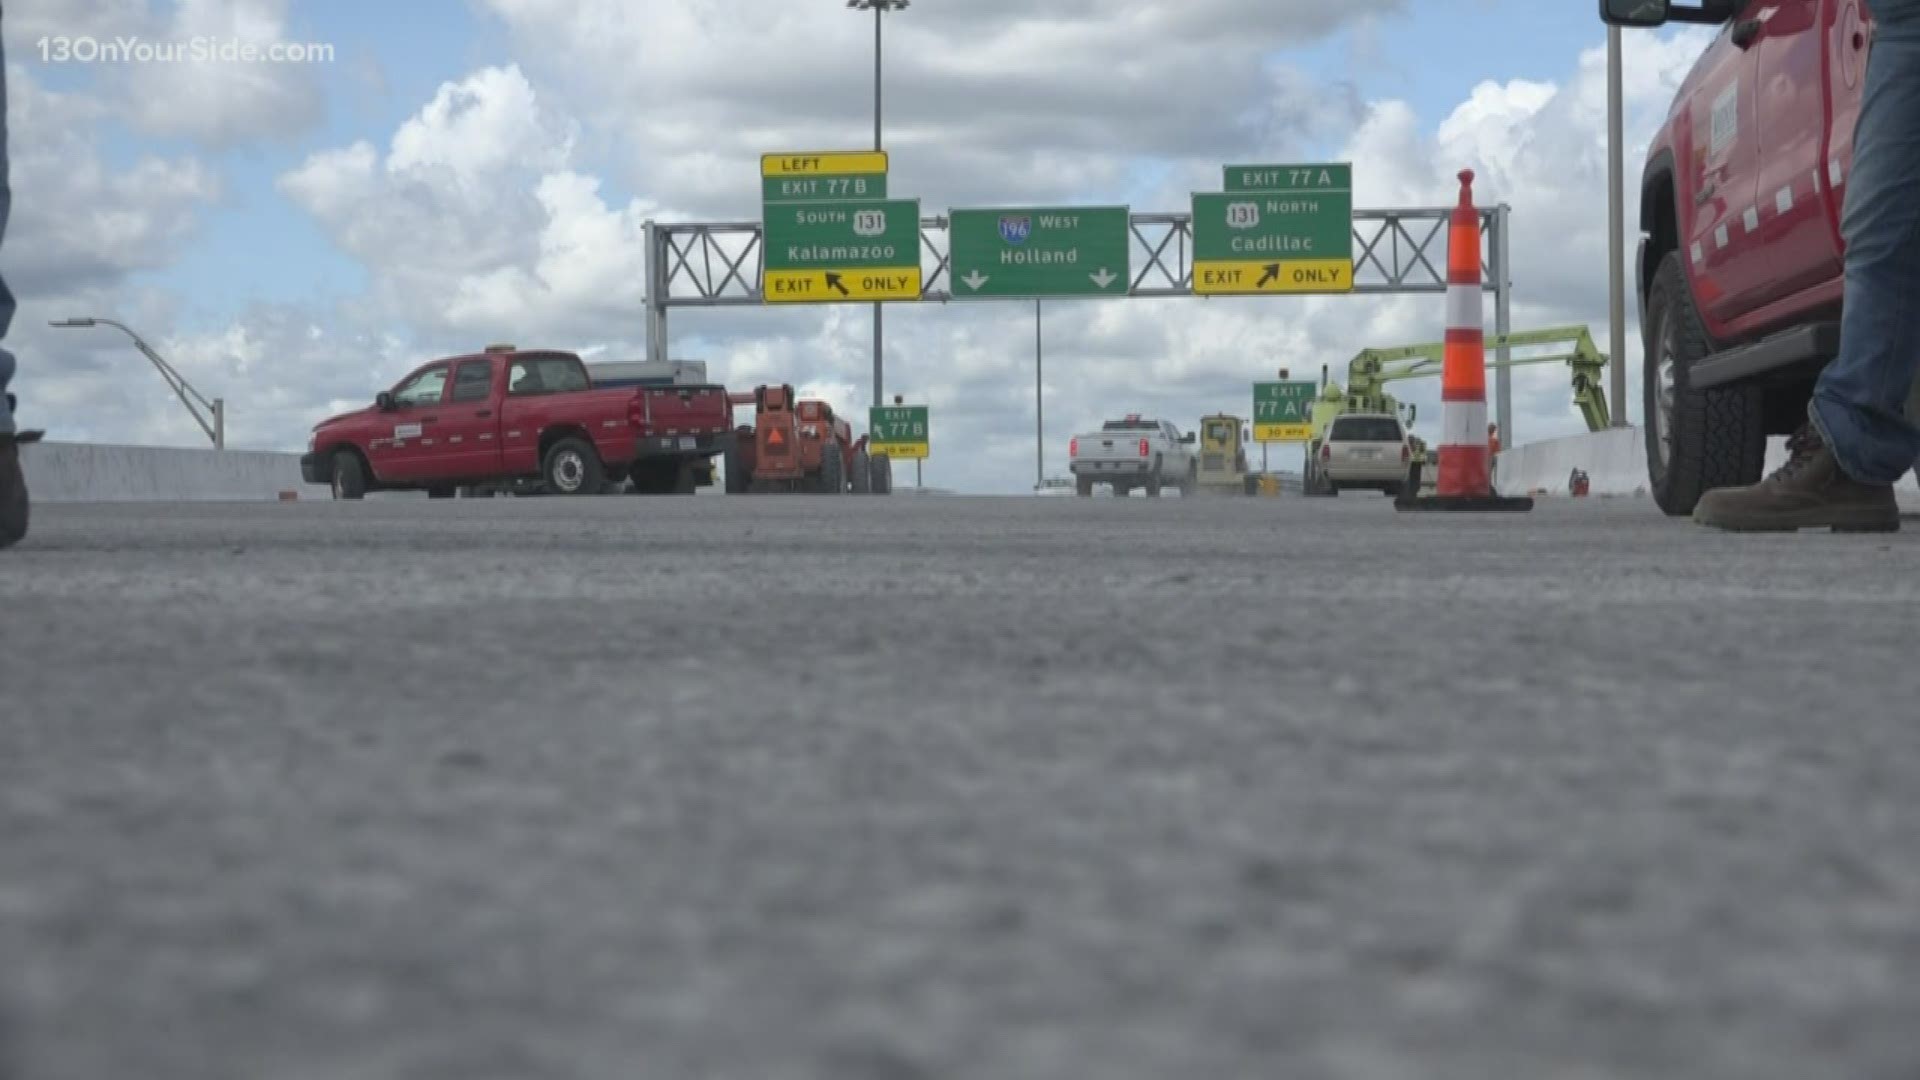 The headache is soon coming to an end. Friday, MDOT will reopen the westbound lanes of I-196 near the Ottawa Avenue exit.